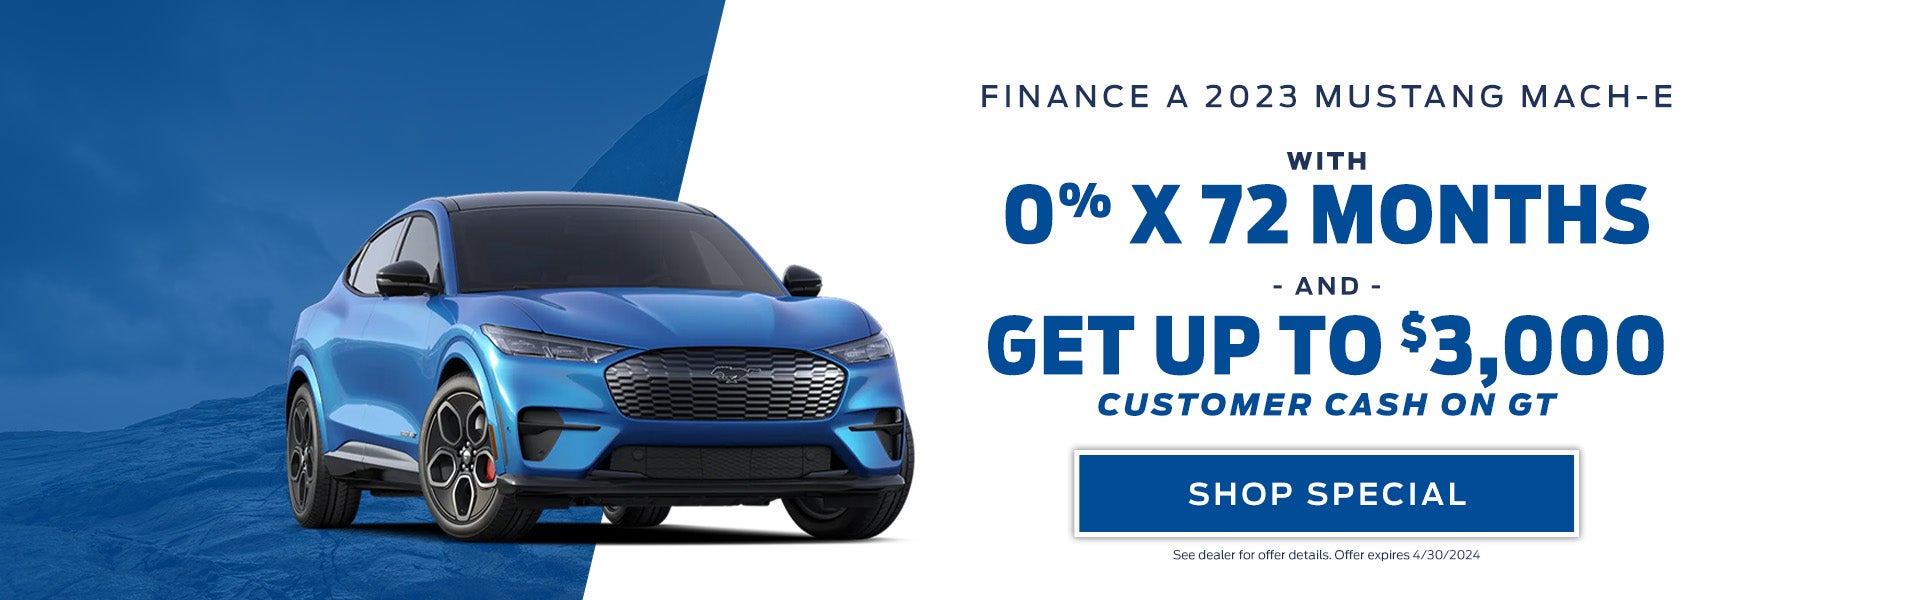 Finance a Mach-E with 0% for 72 months 